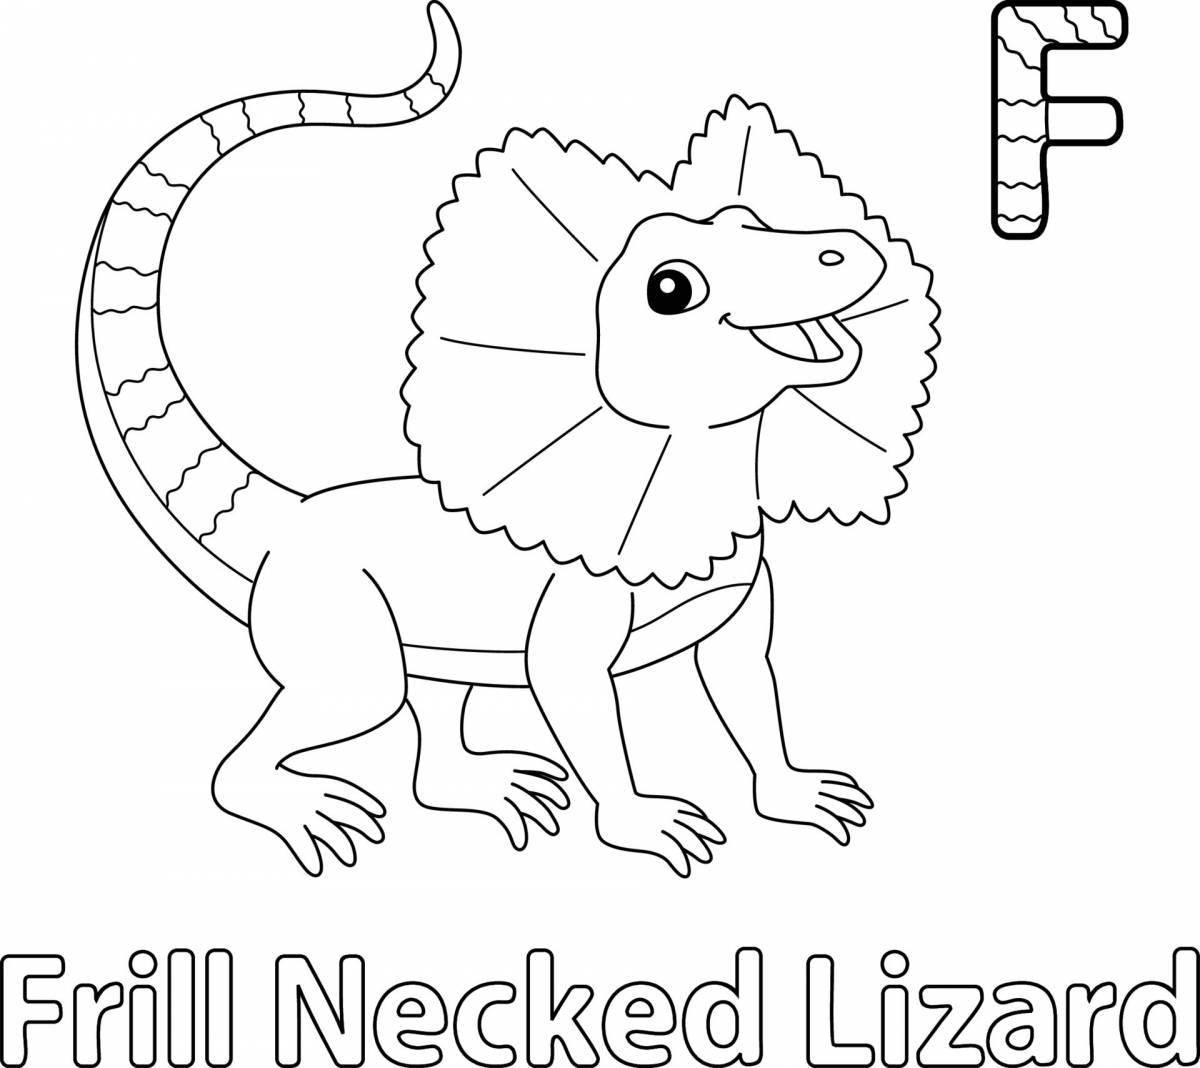 Colouring bright frilled lizard